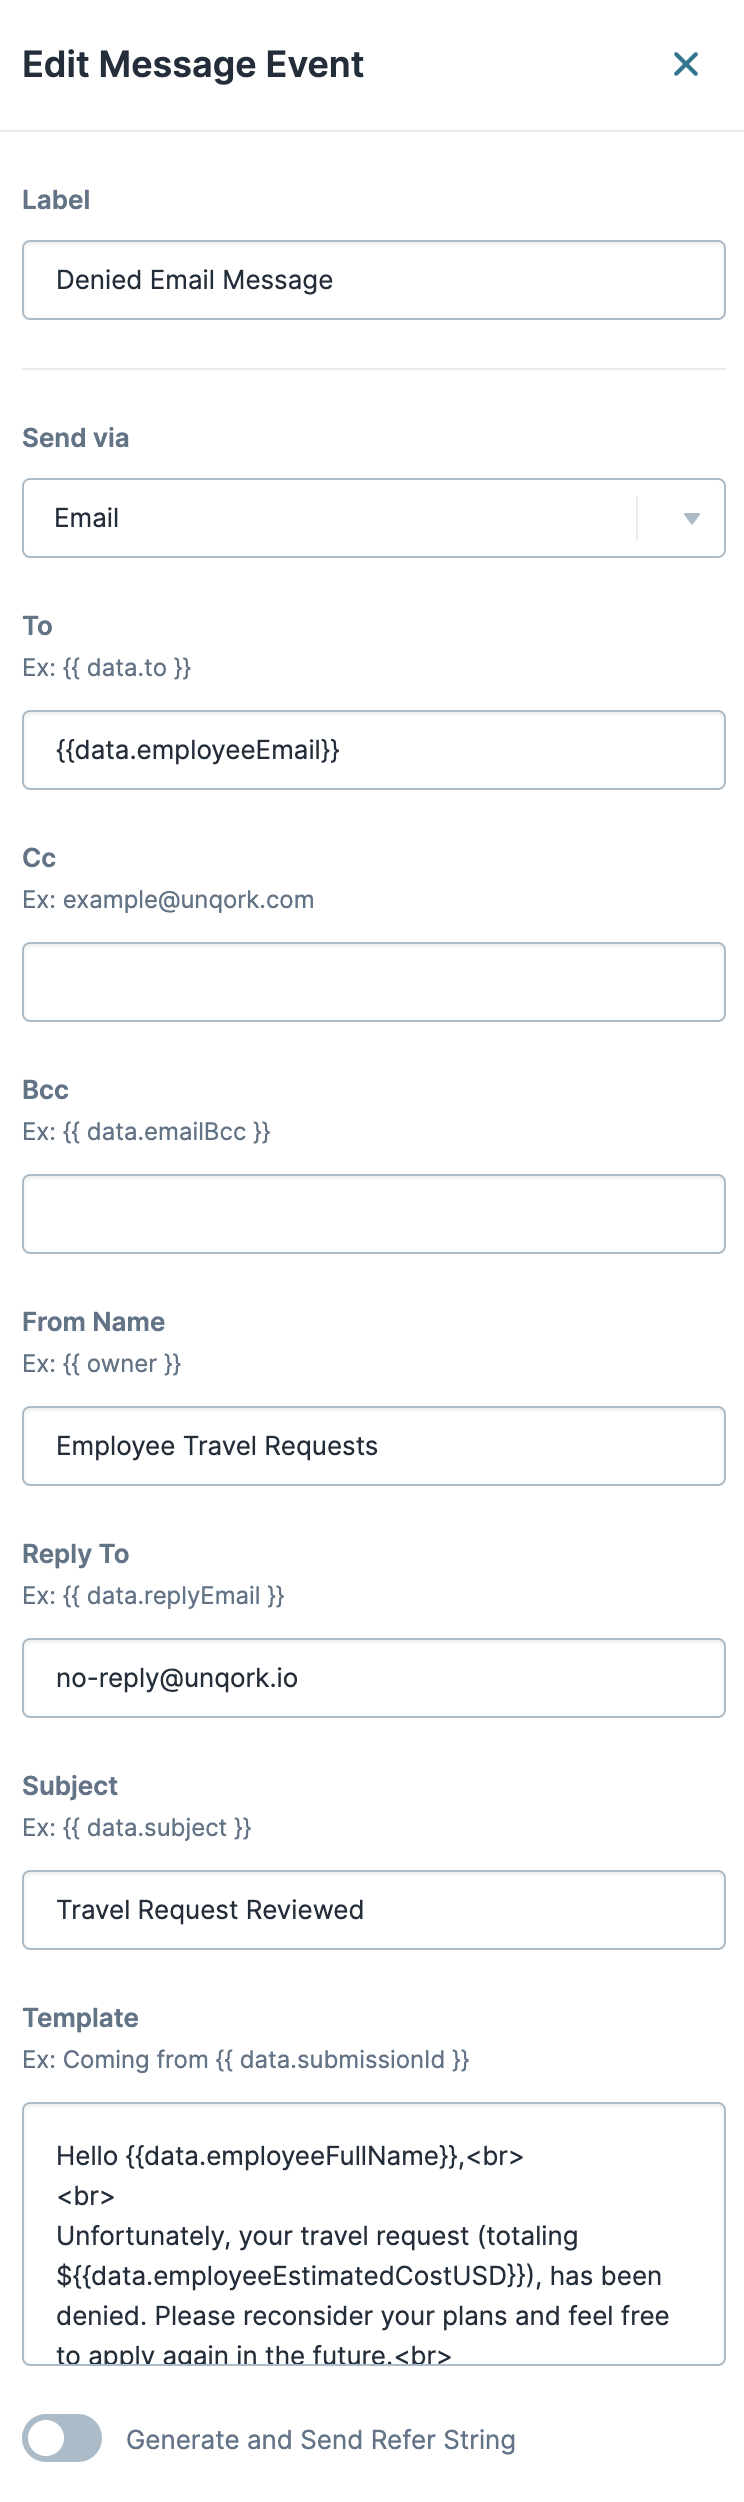 Image displaying the Message node configuration that notifies employees that their travel request application is denied.